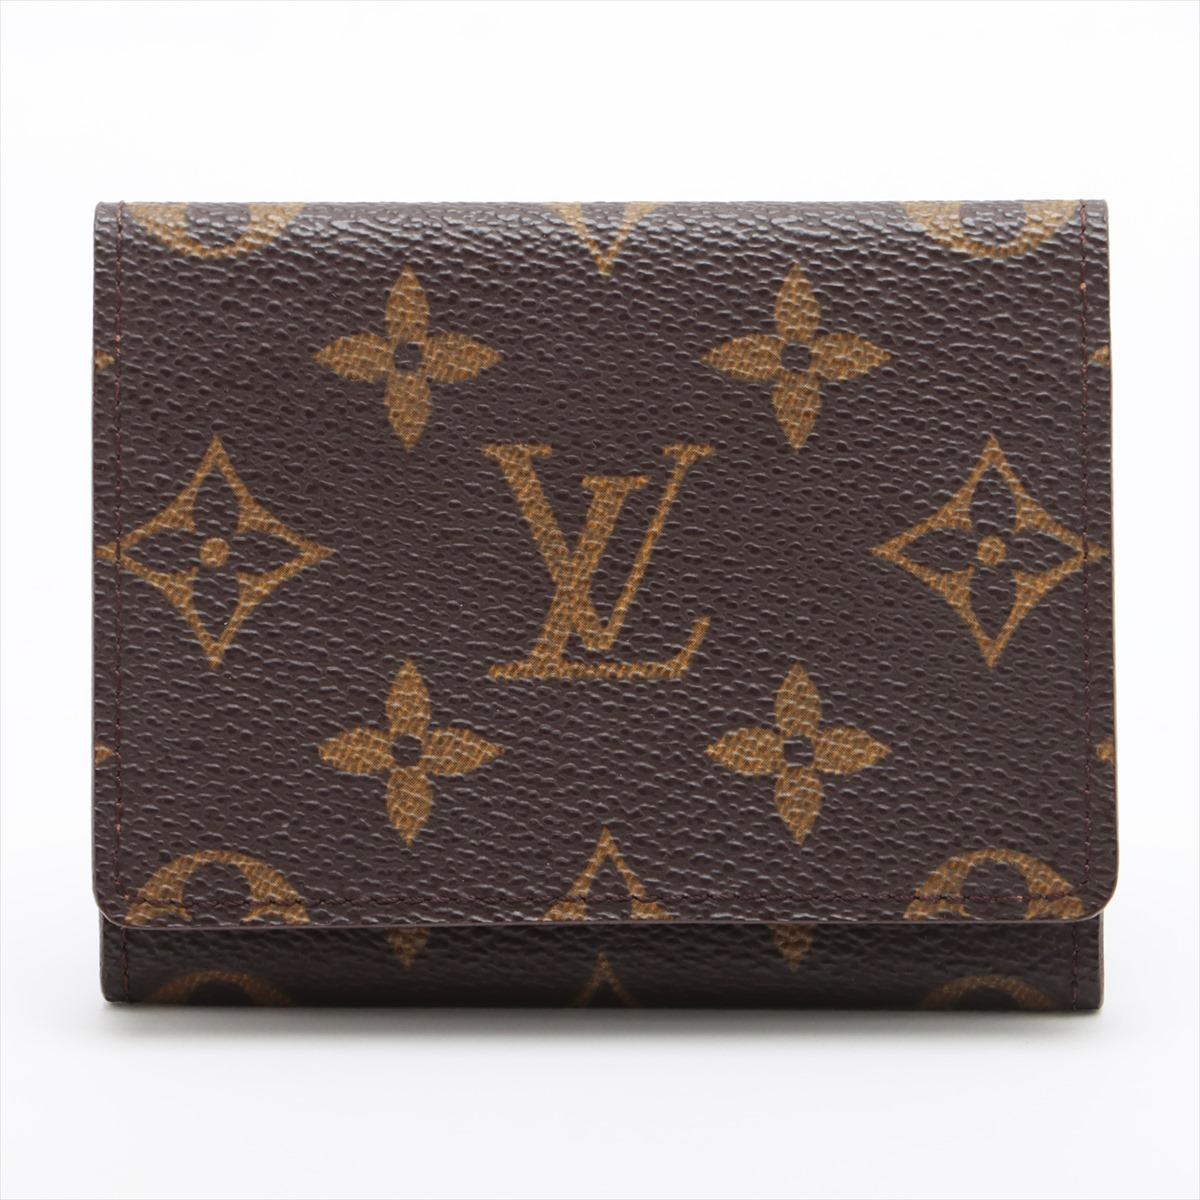 The Louis Vuitton Monogram Envelope Cult De Visite a sophisticated and stylish accessory that reflects the luxury and craftsmanship synonymous with the Louis Vuitton brand. The envelope features iconic Monogram canvas, showcasing the signature LV